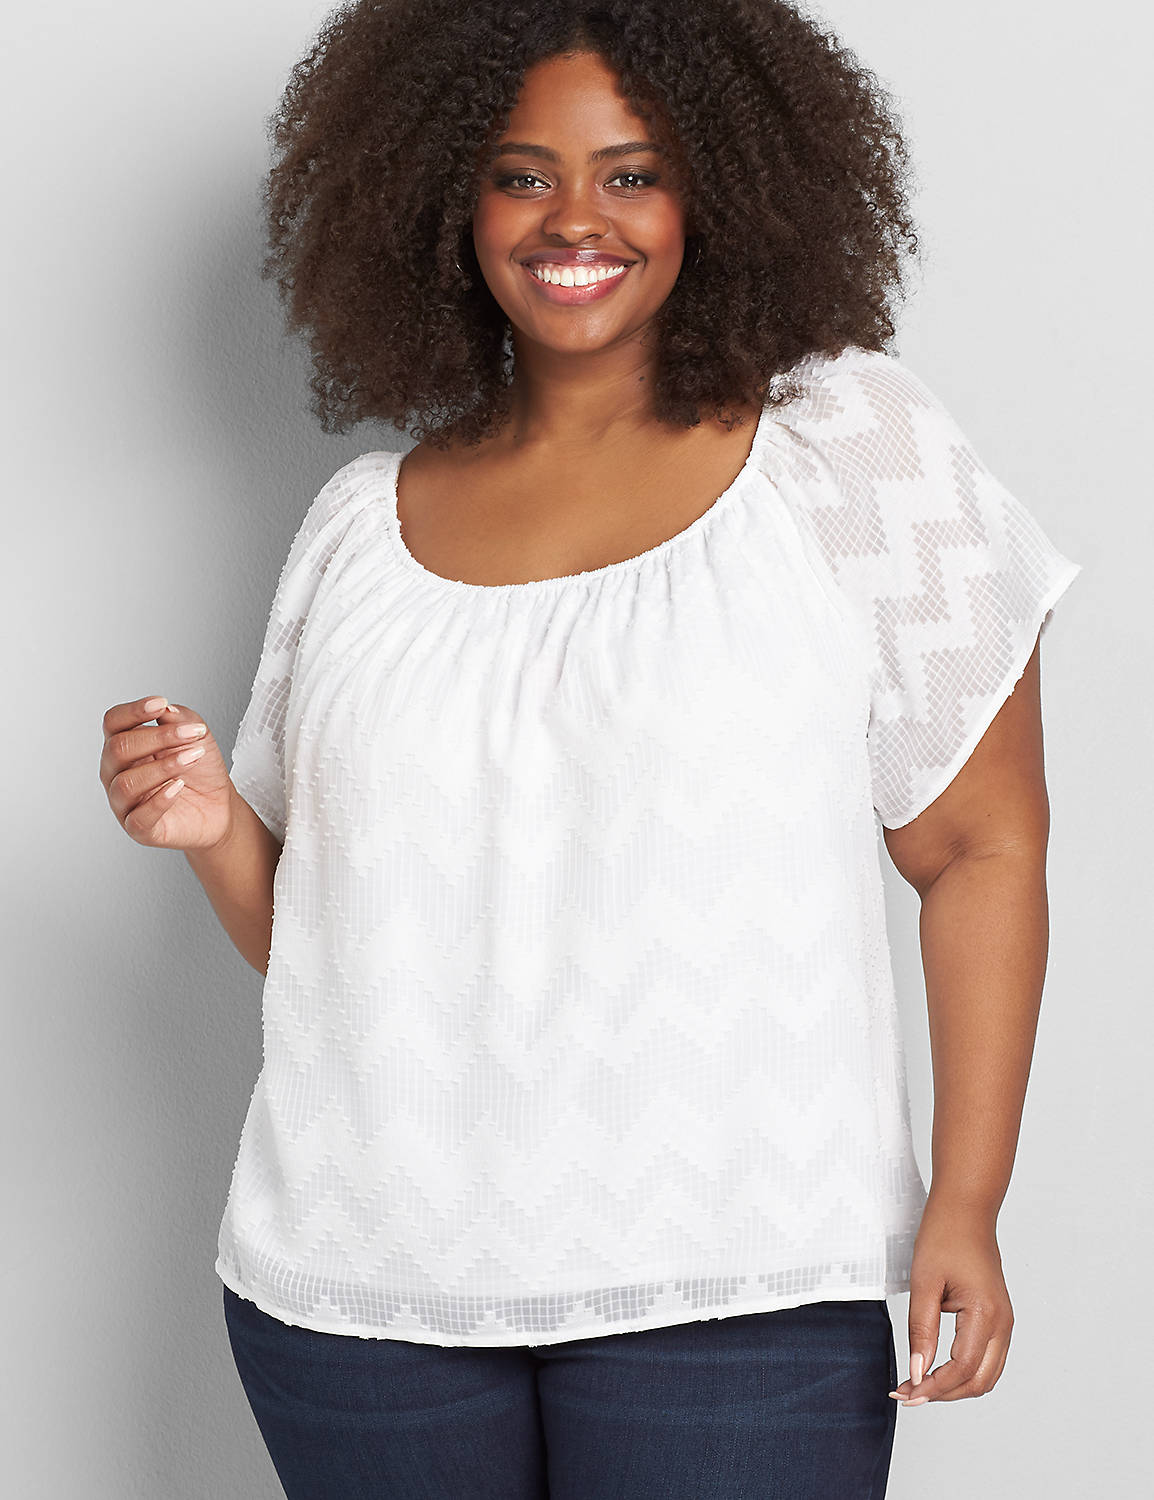 Textured  Off-The-Shoulder Top Product Image 4